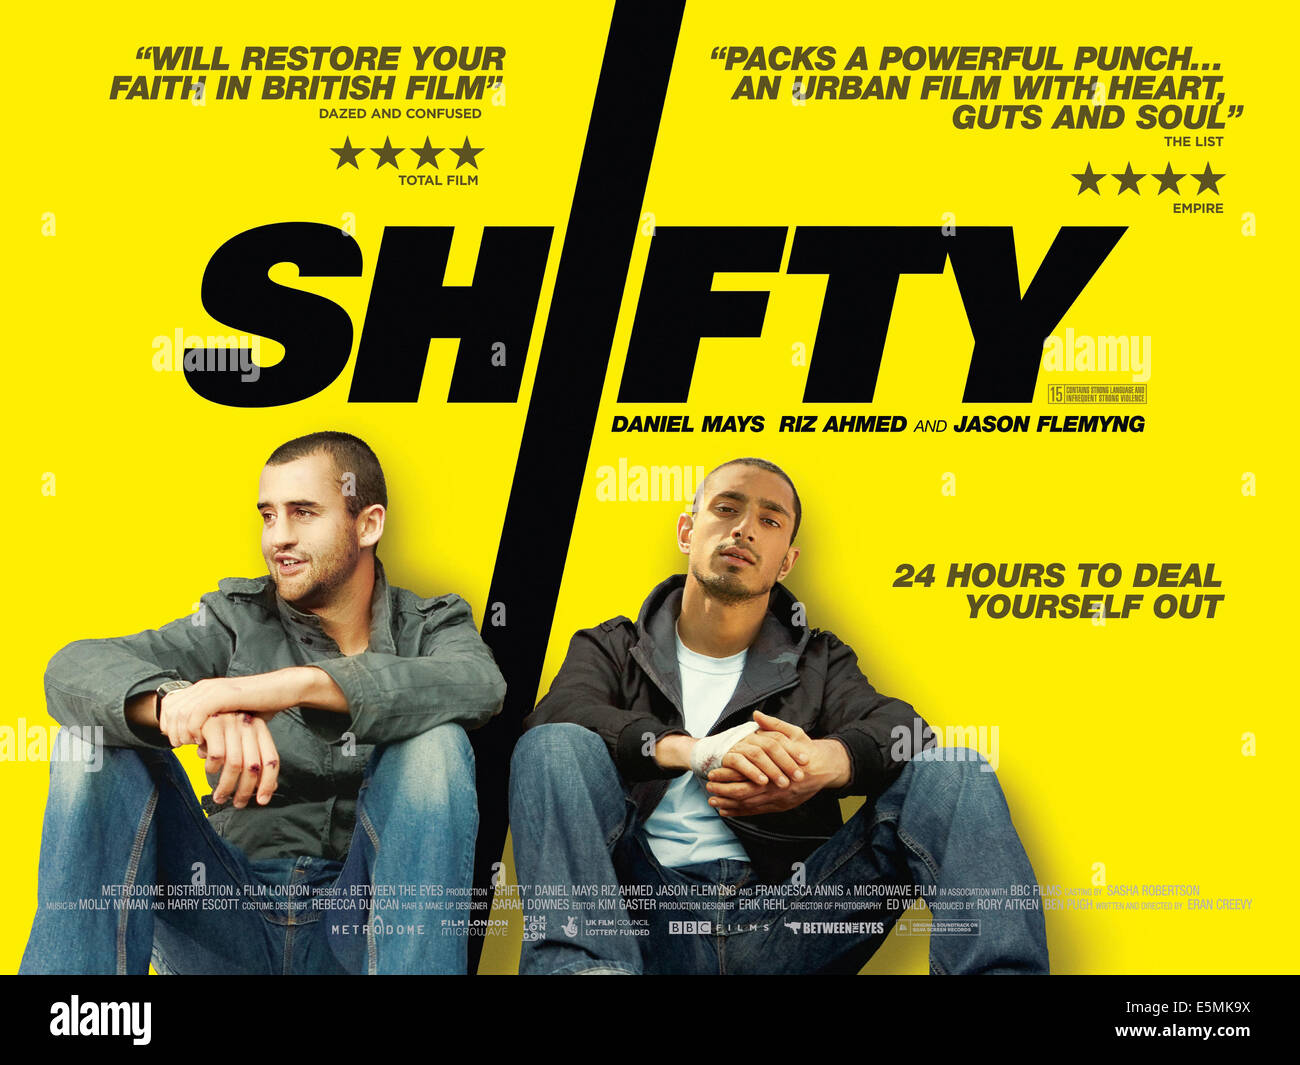 SHIFTY, British poster art, Daniel Mays, Riz Ahmed, 2008. ©Breaking Glass Pictures/Courtesy Everett Collection Stock Photo